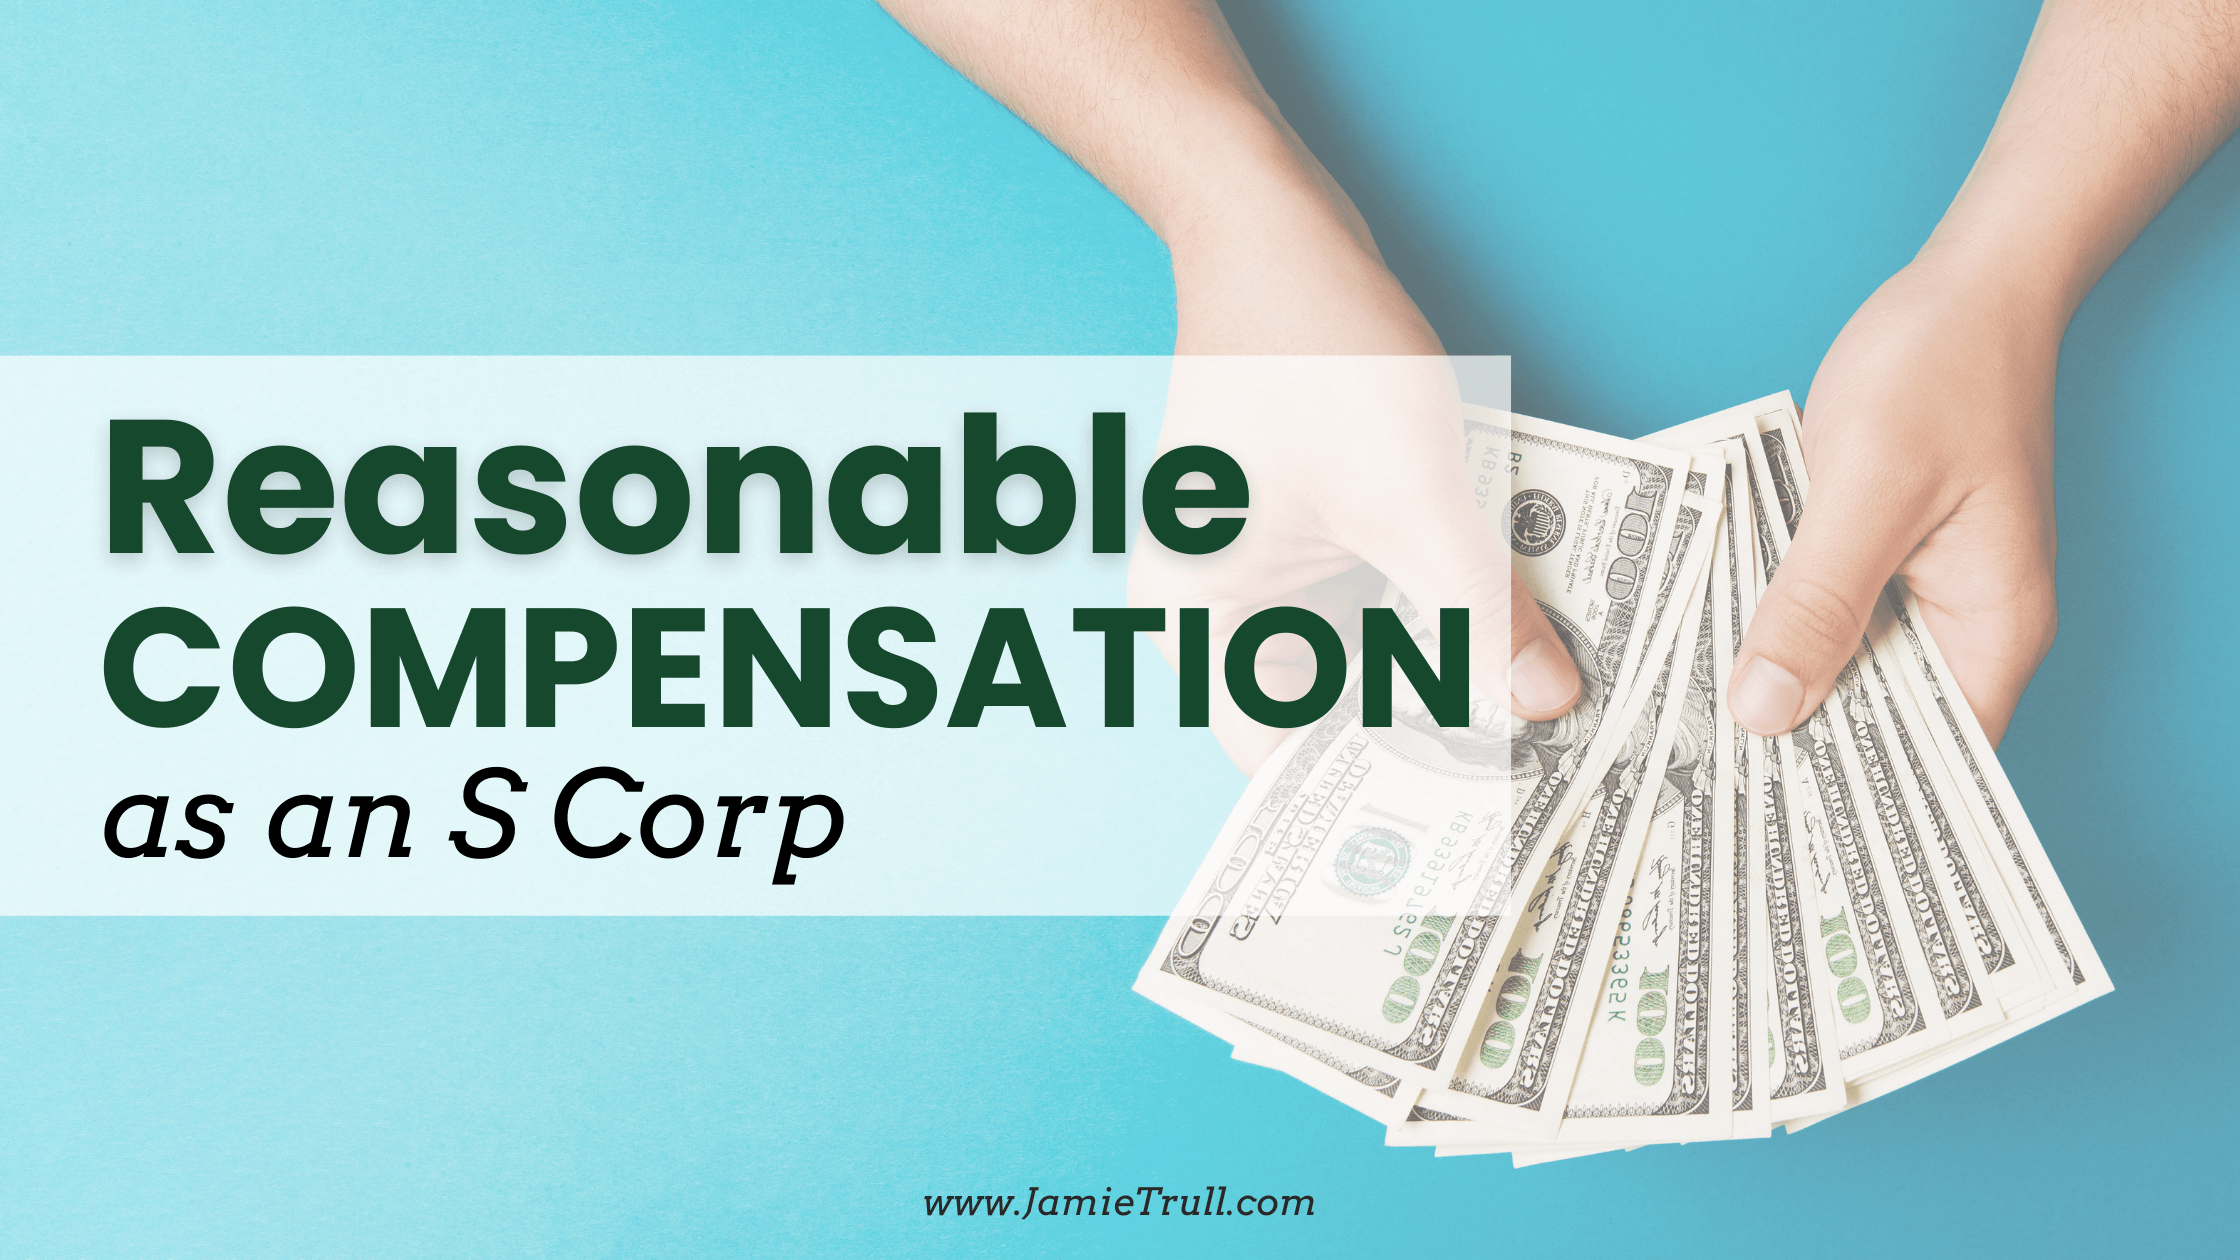 Let's take a look at your business income and other factors to determine whether you should file as an S corporation.